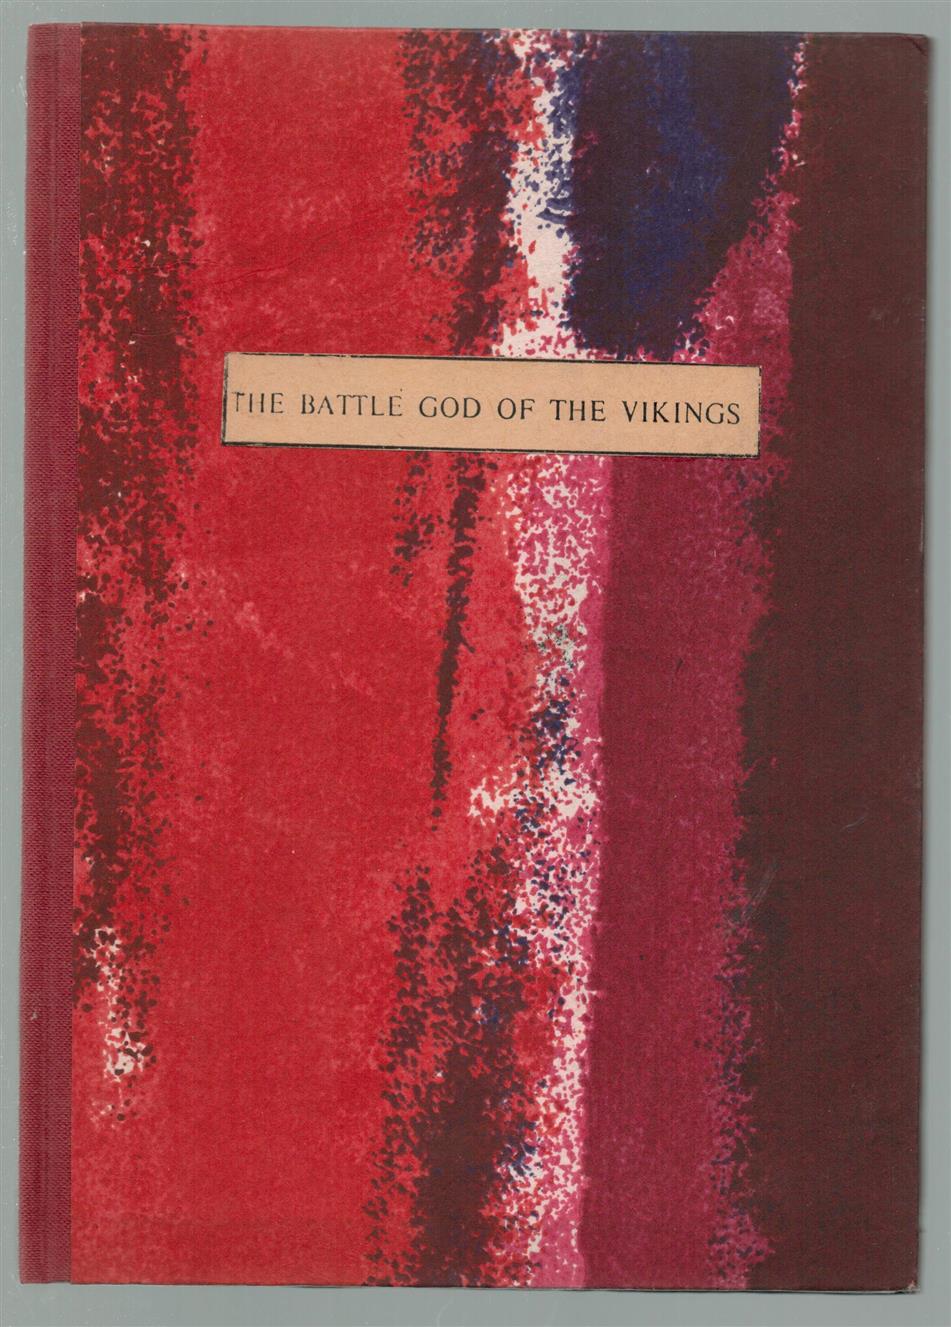 Hilda Roderick Ellis Davidson - The battle god of the Vikings: the first G.N. Garmonsway Memorial Lecture, delivered 29 October 1975 in the University of York